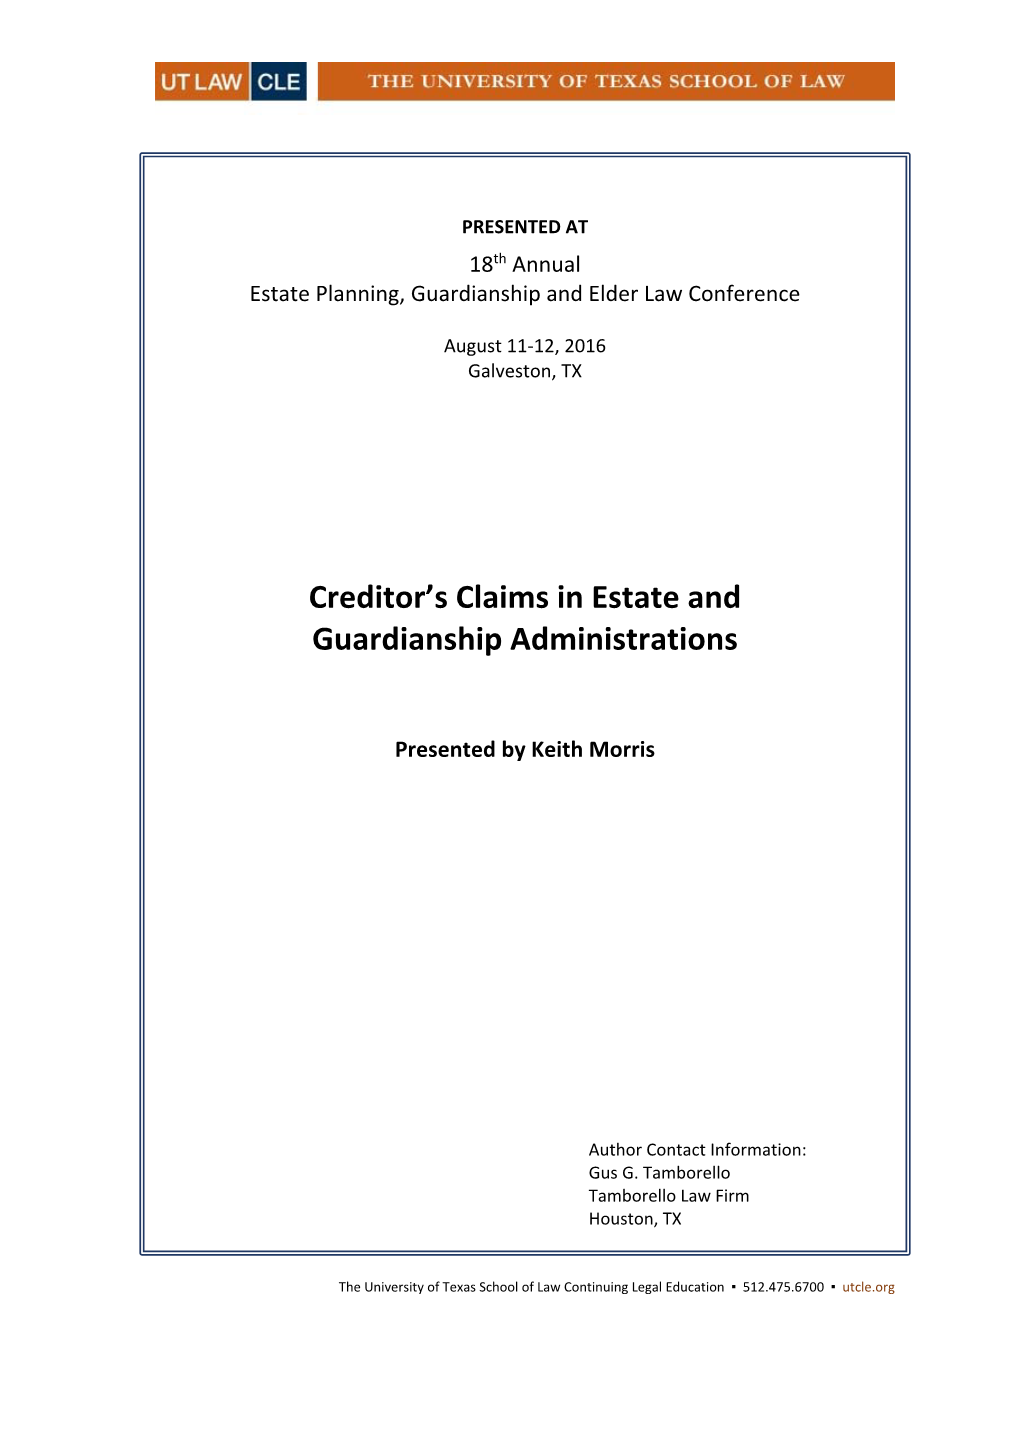 Creditor's Claims in Estate and Guardianship